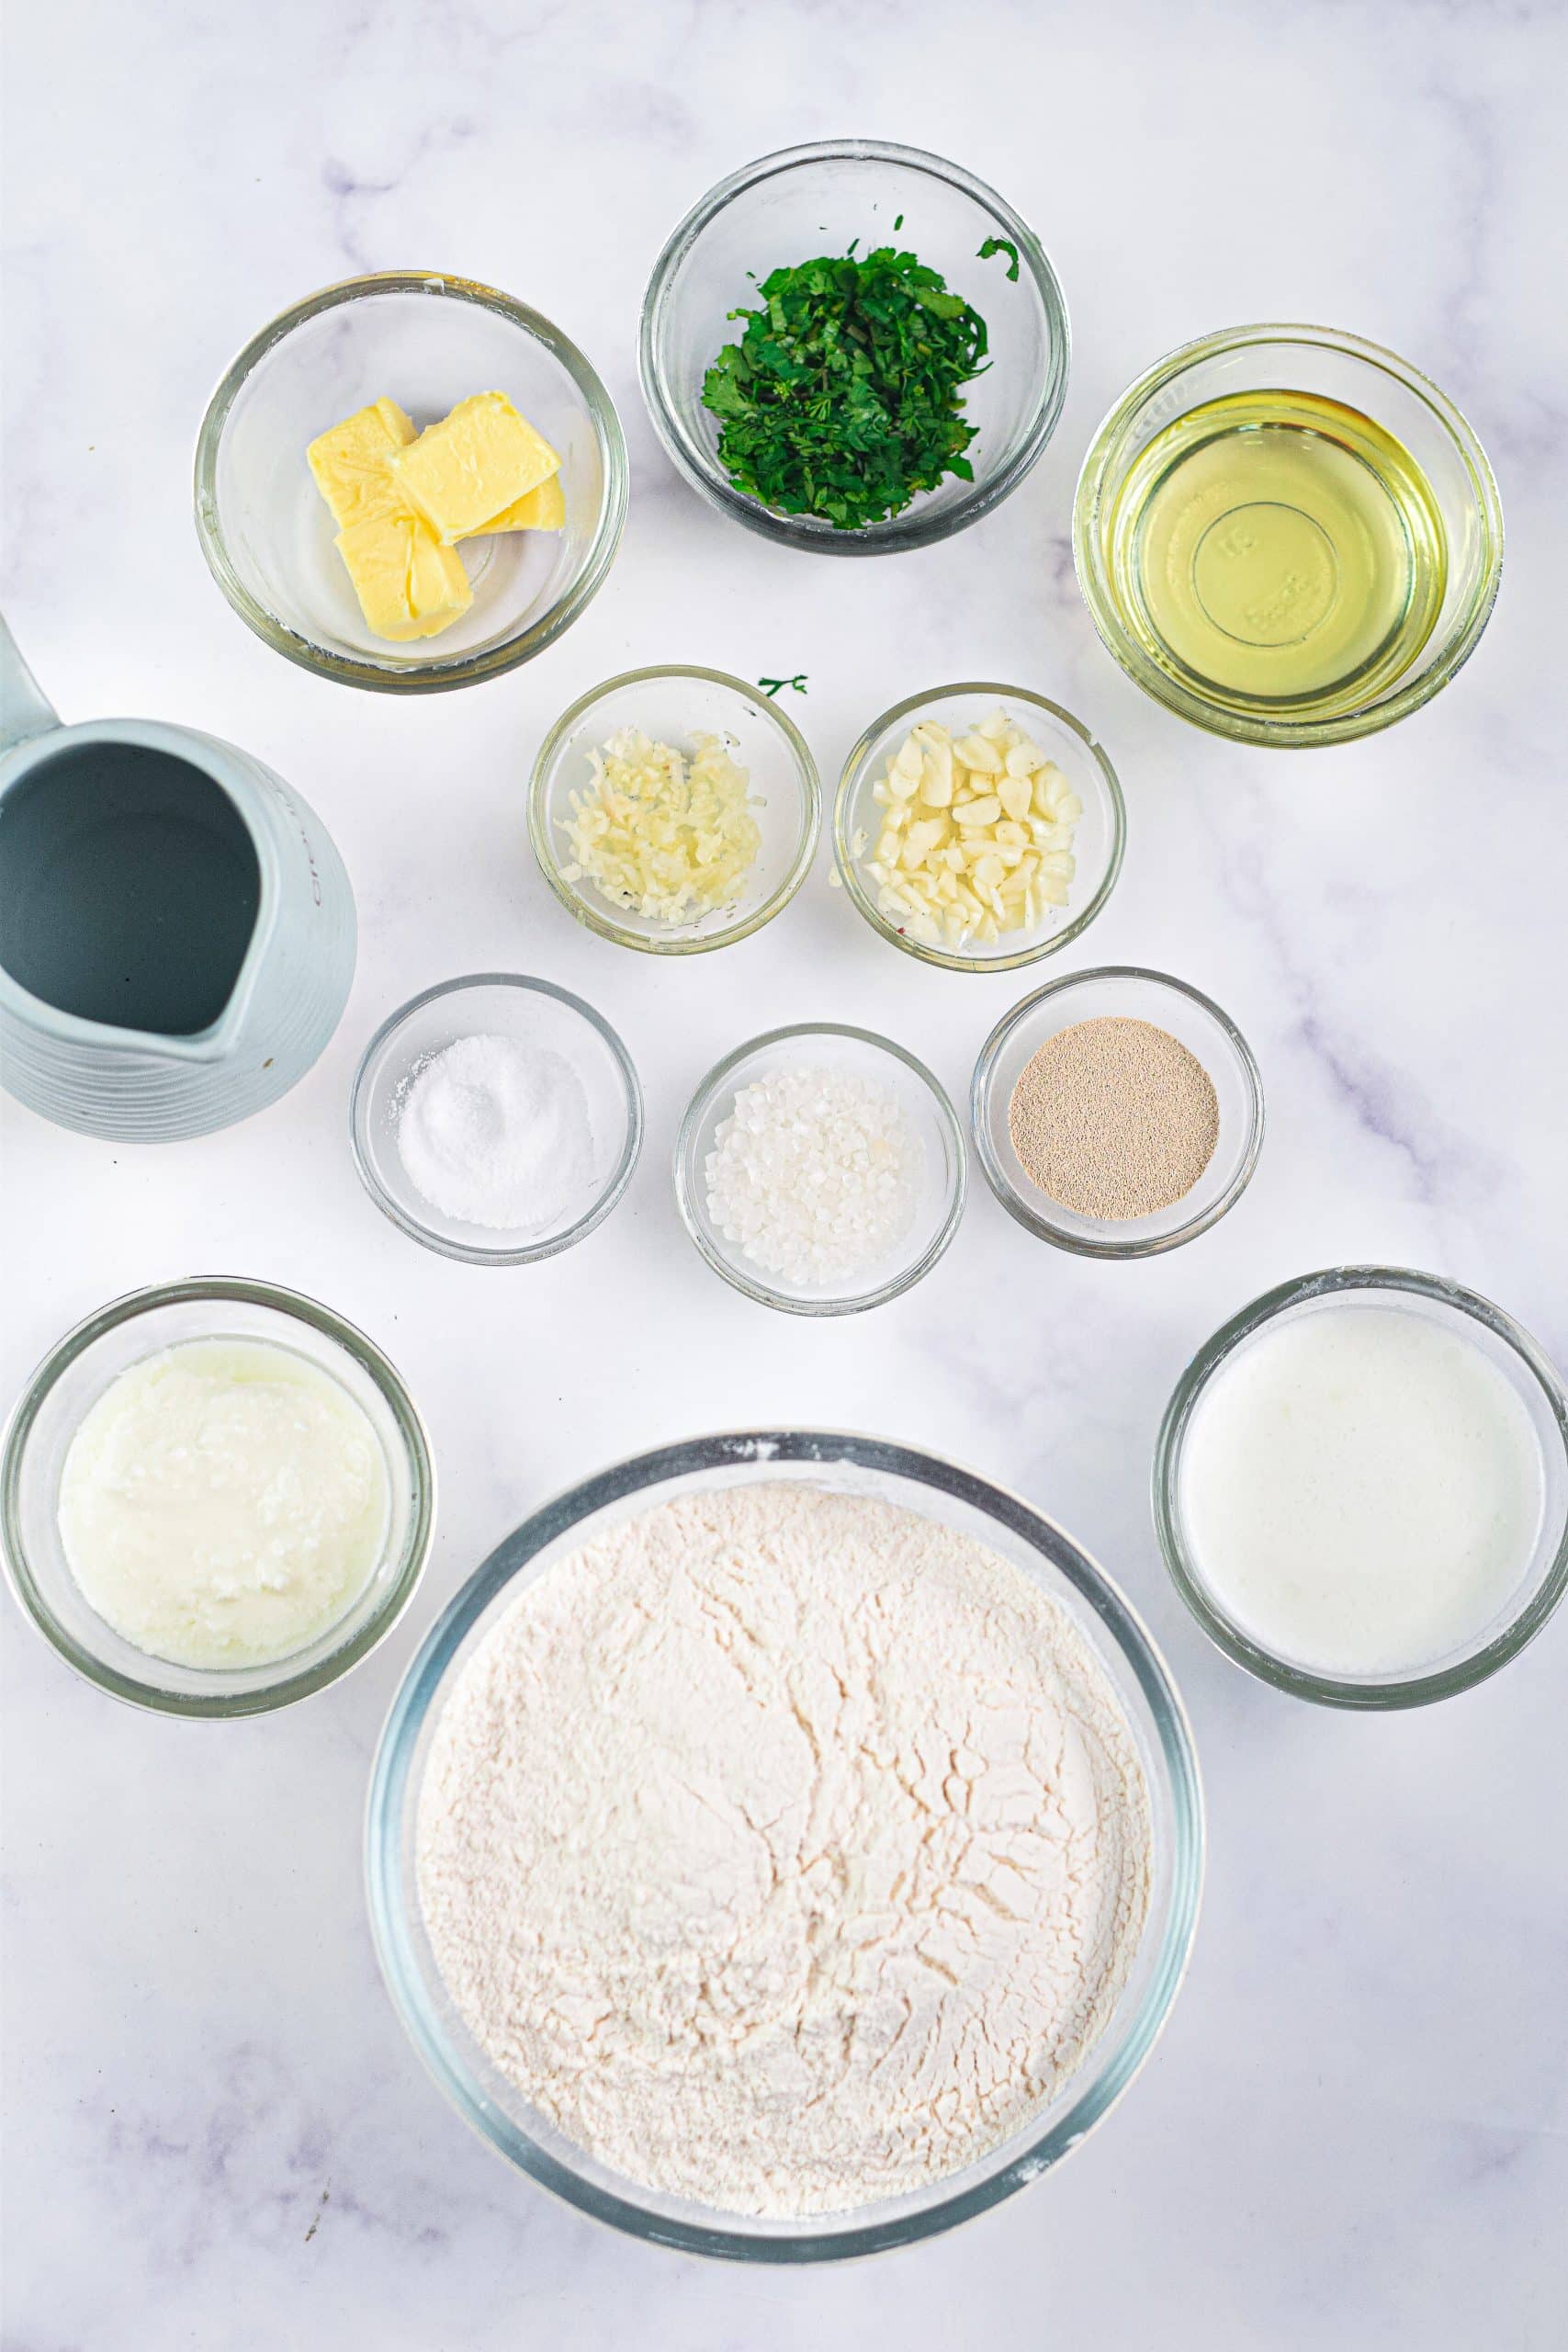 an overhead image showing the measured ingredients needed to make a batch of garlic naan bread in the air fryer